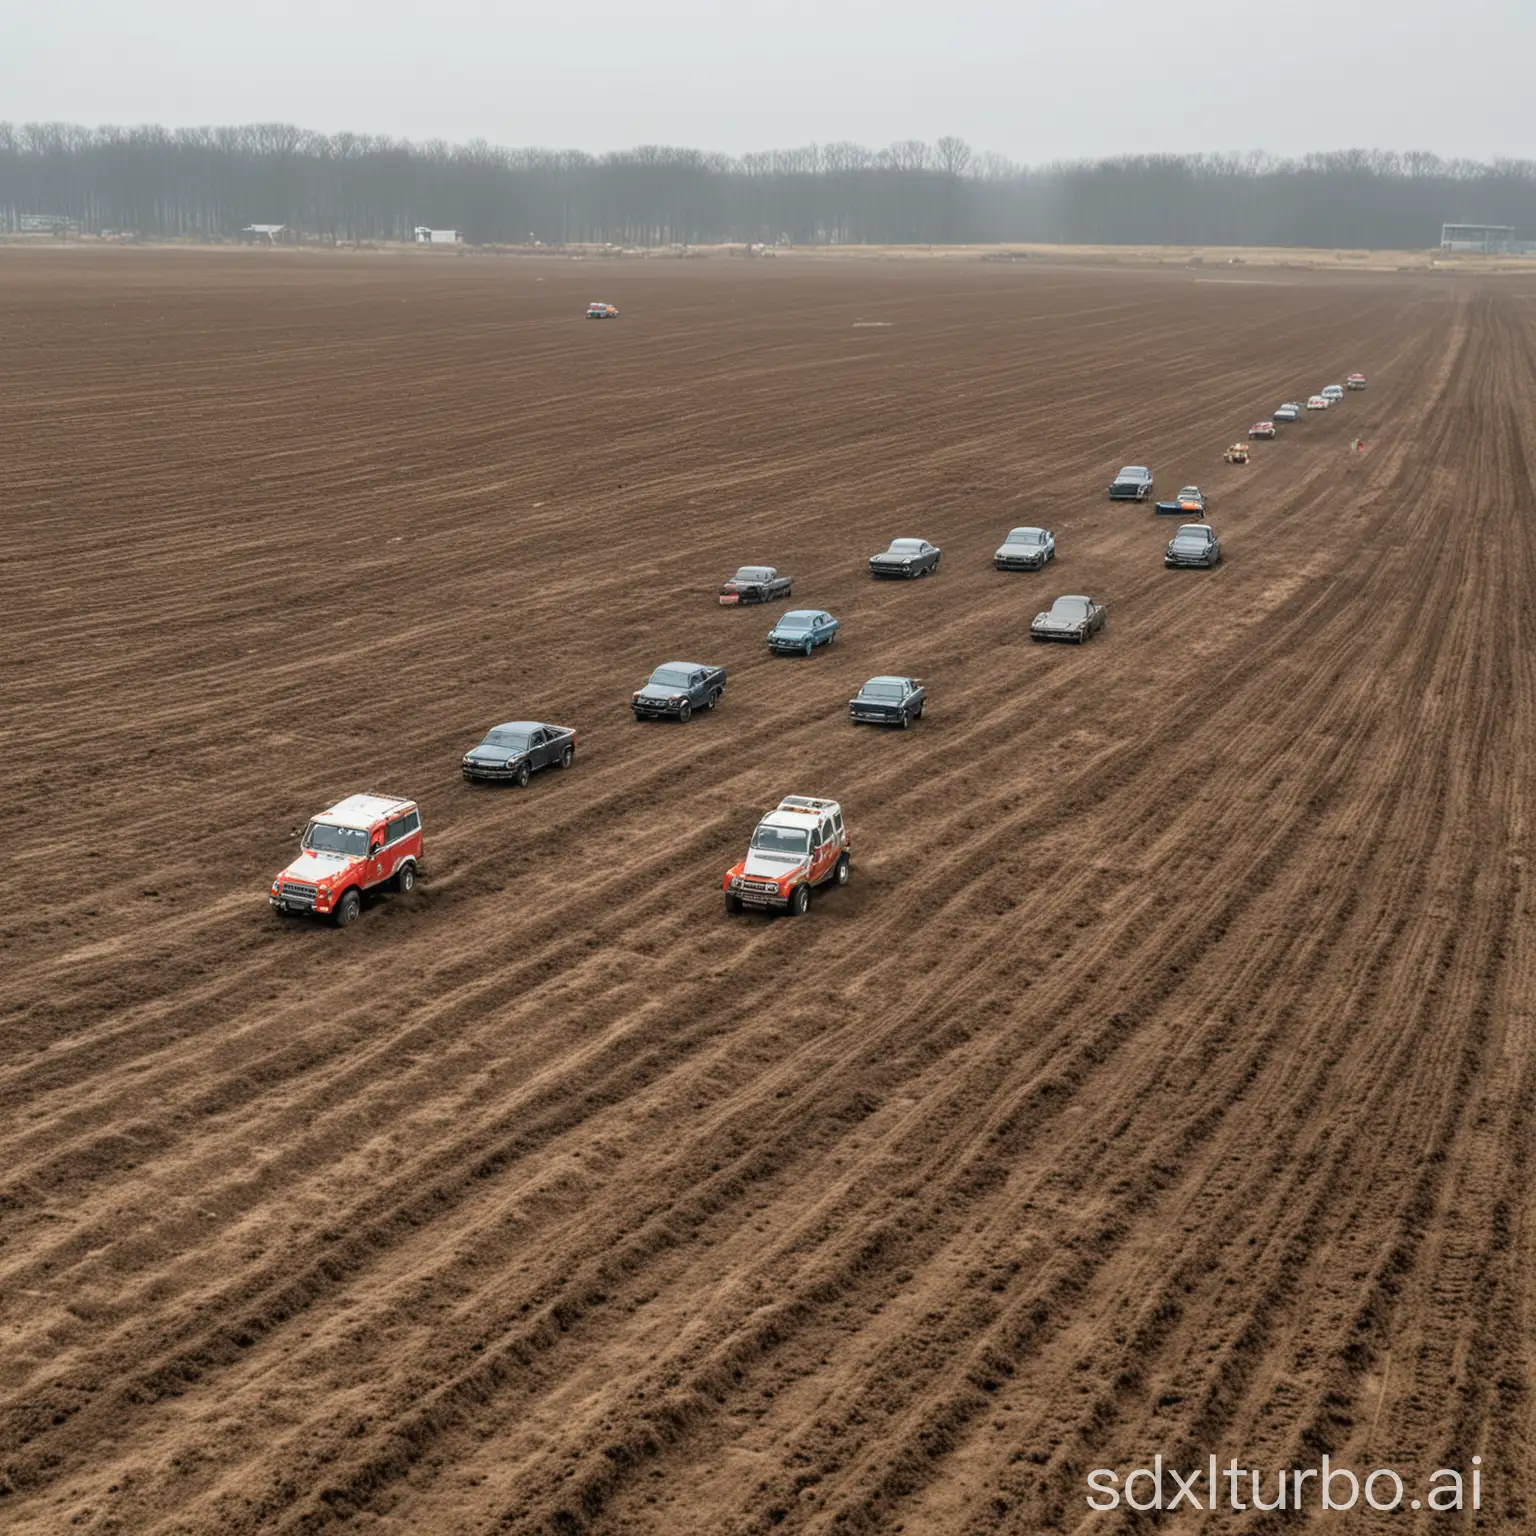 Cars are running in the field